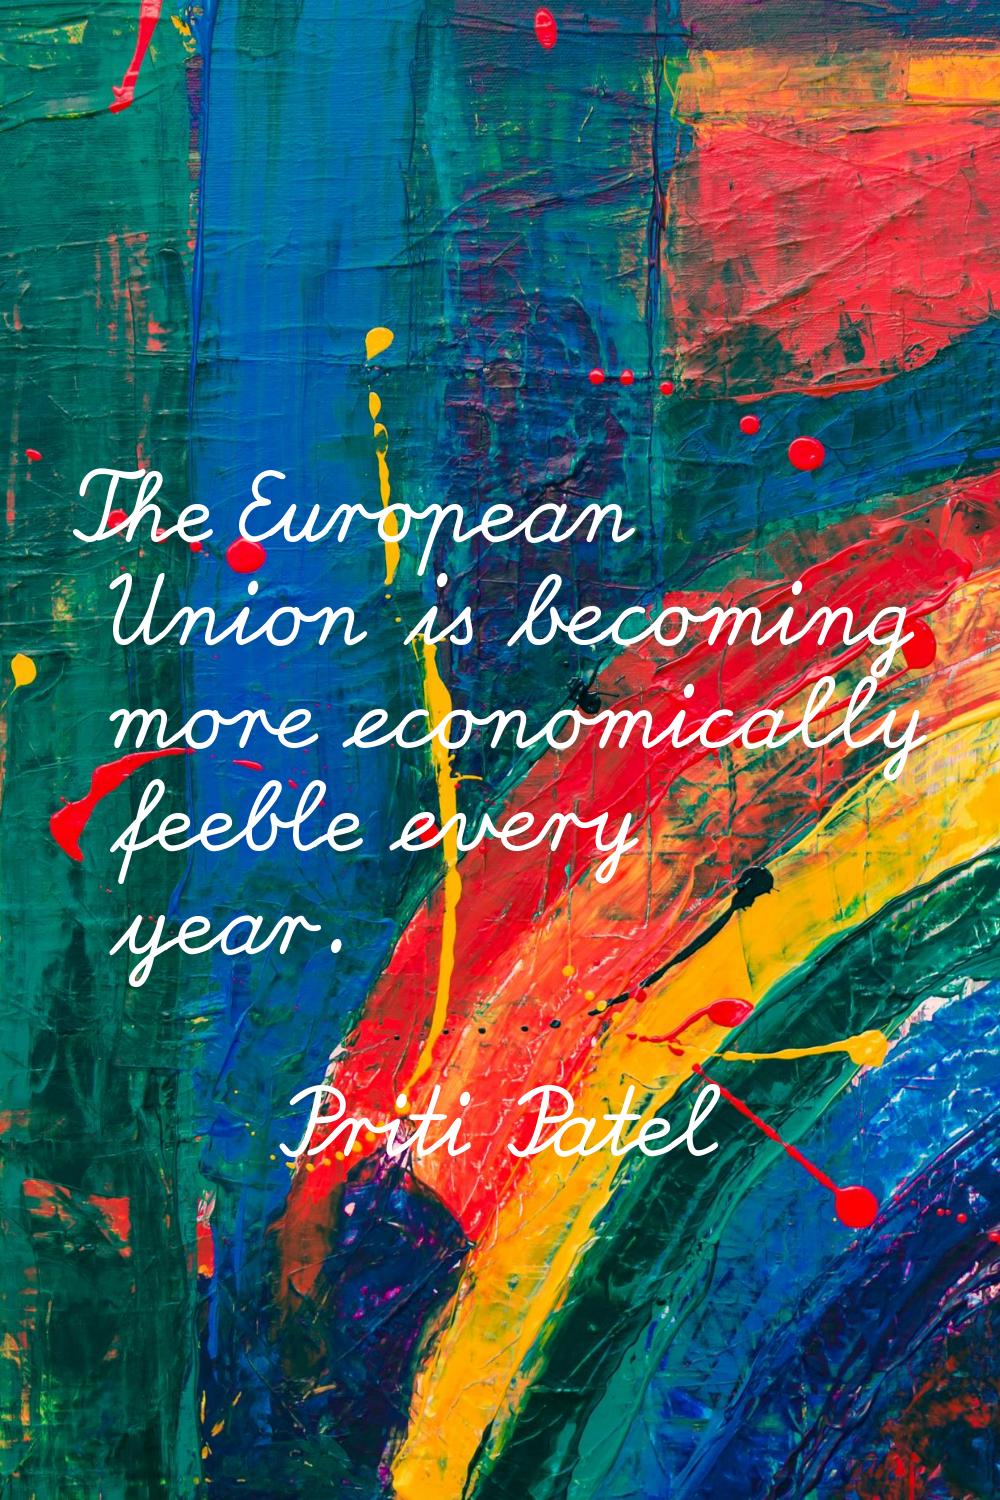 The European Union is becoming more economically feeble every year.